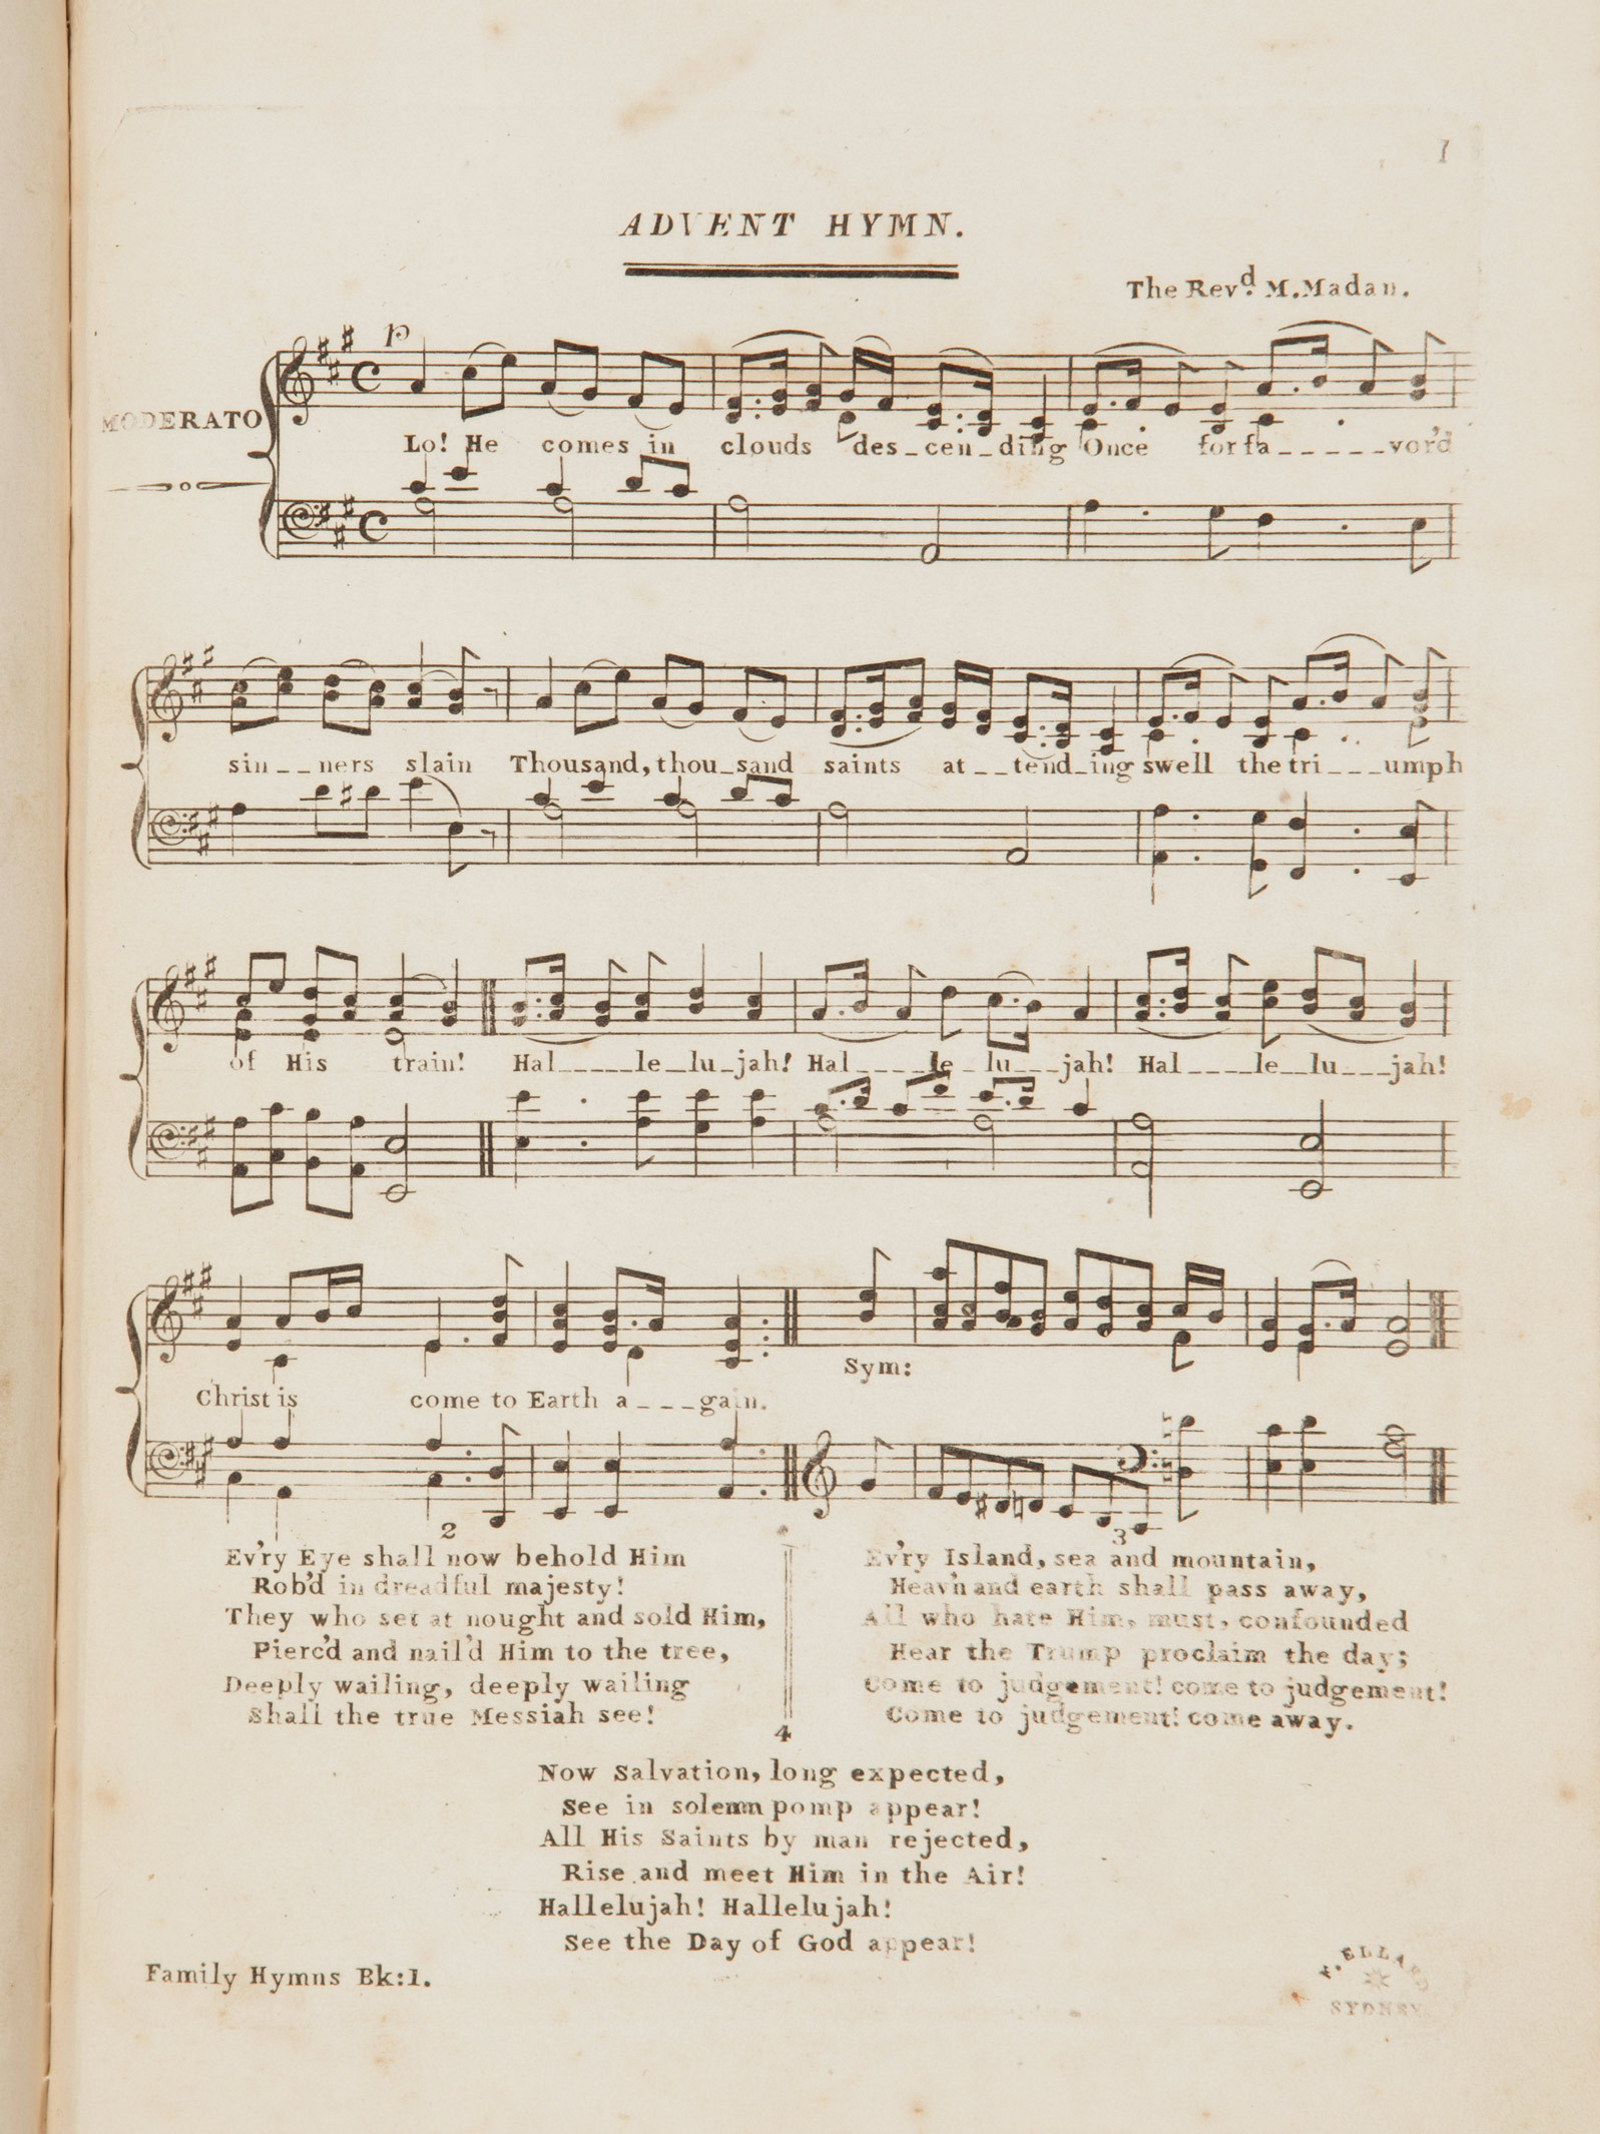 Family Hymns, sheet music composed by J. F. Burrowes, published circa 1839-1845  